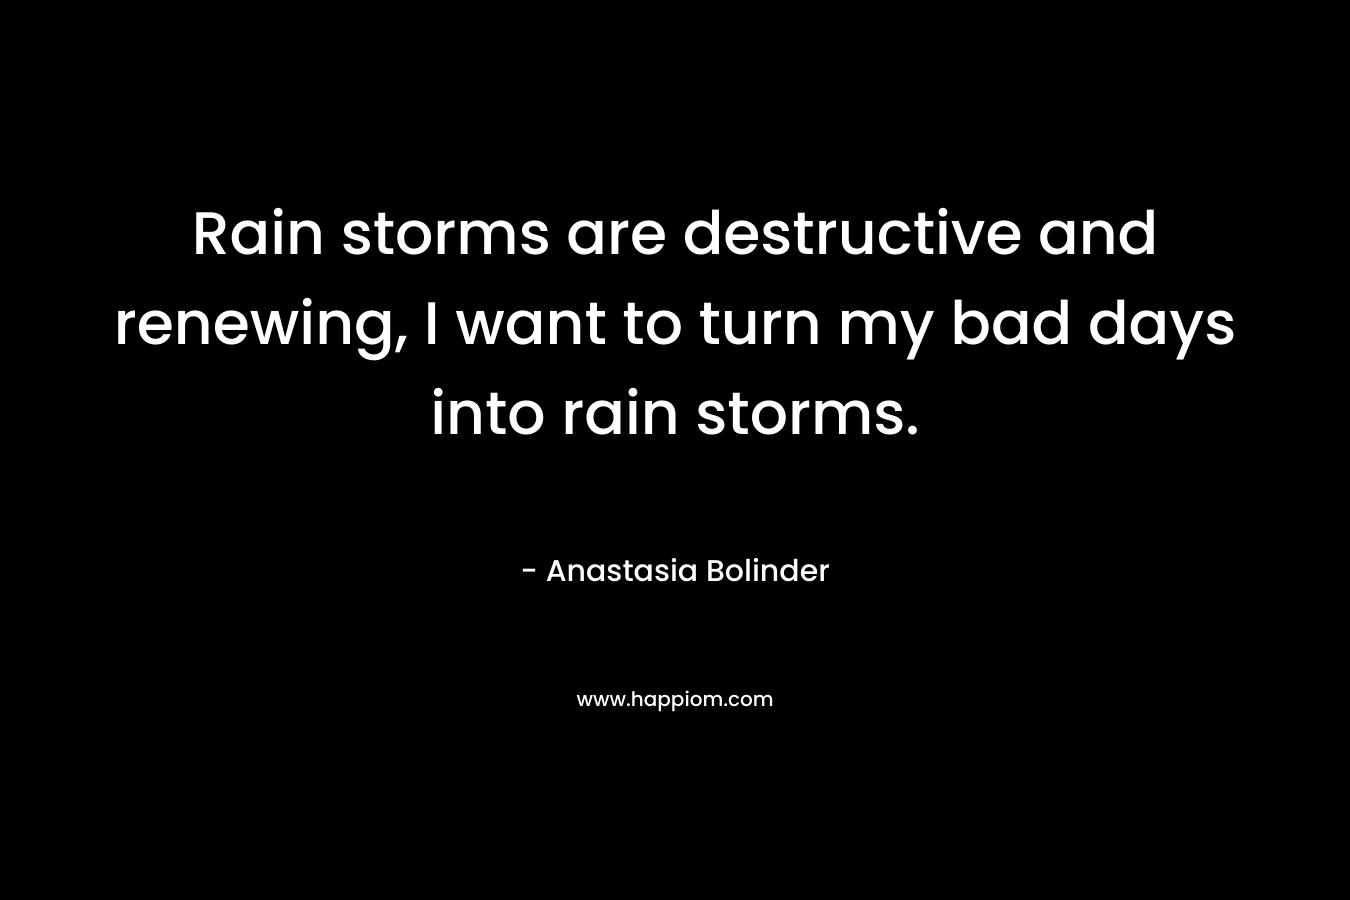 Rain storms are destructive and renewing, I want to turn my bad days into rain storms. – Anastasia Bolinder